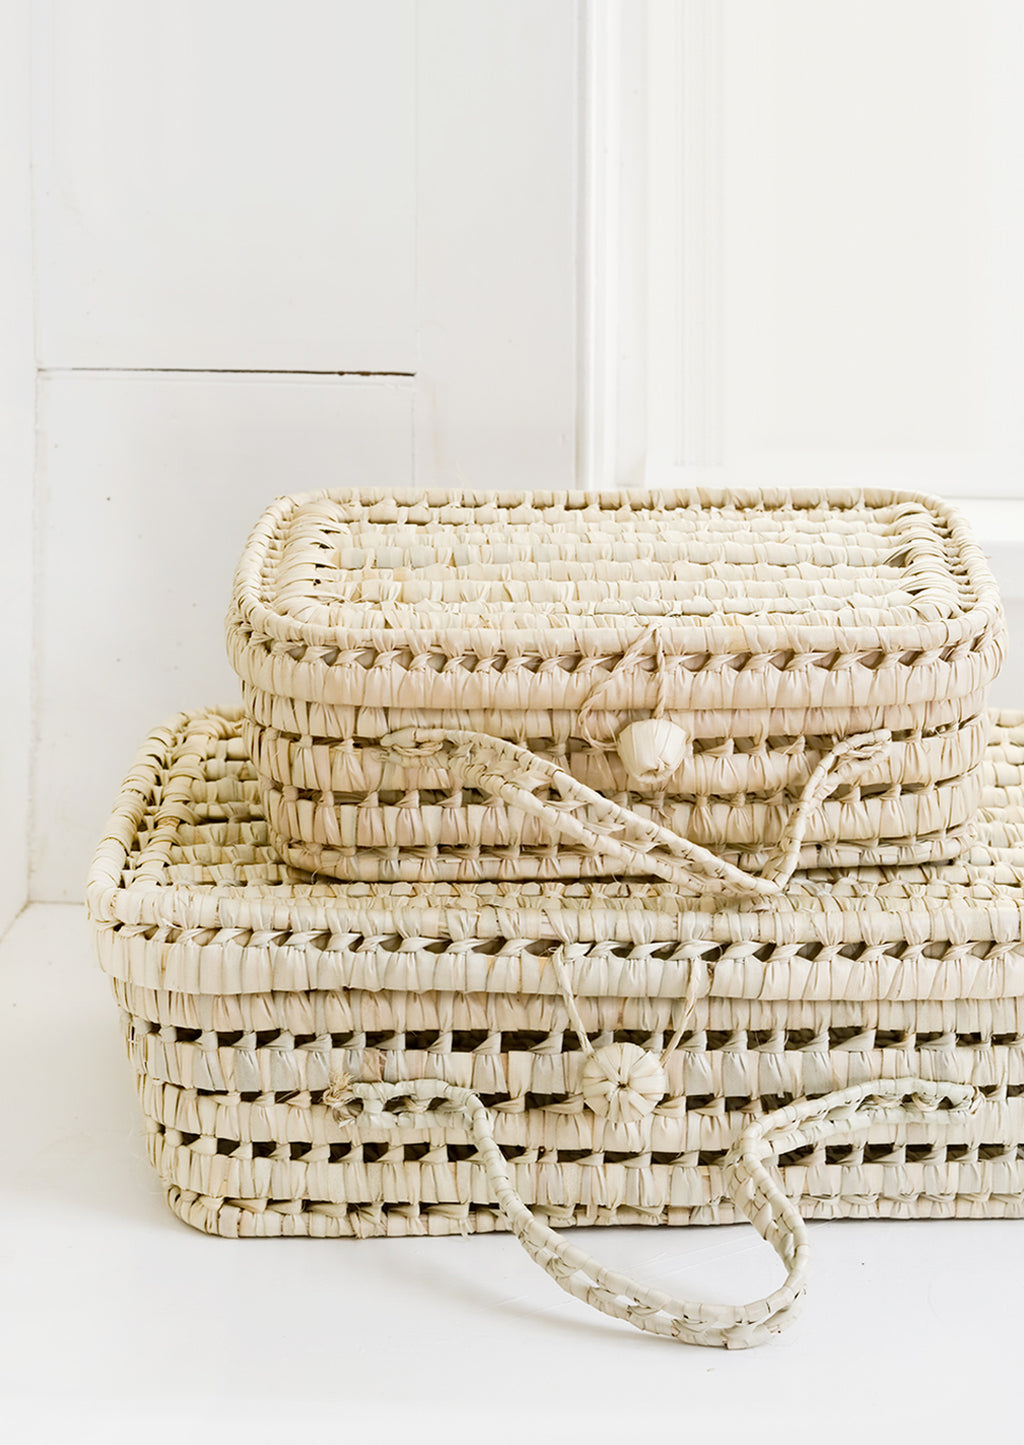 1: Baskets woven from natural palm leaf in suitcase shape, in small and large sizes.